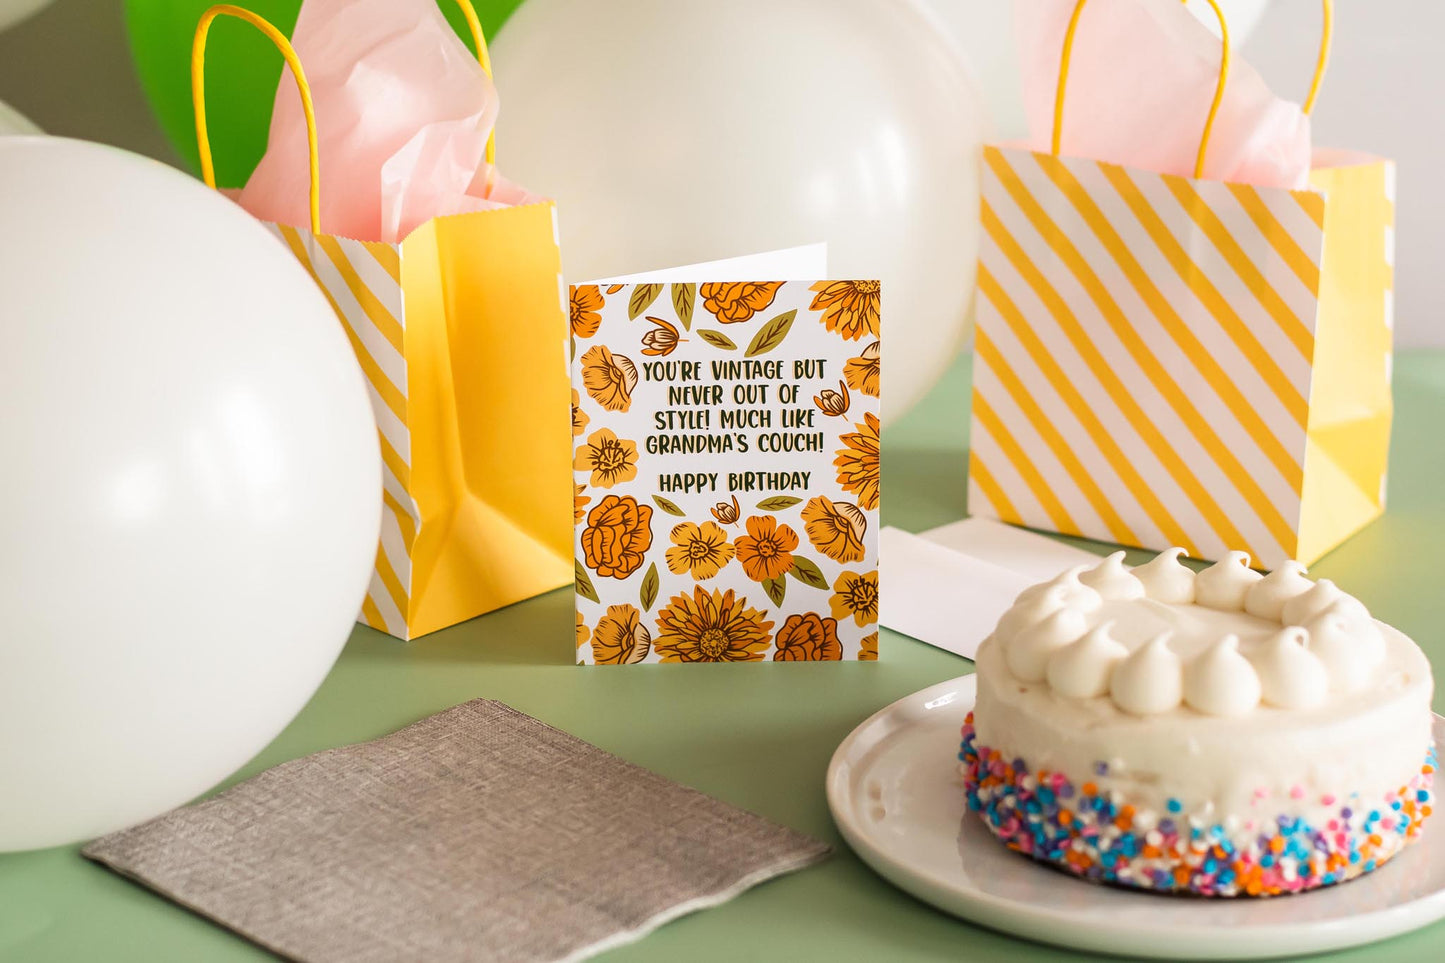 You're Vintage But Never Out Of Style Much Like Grandma's Couch! Happy Birthday!- Greeting Card